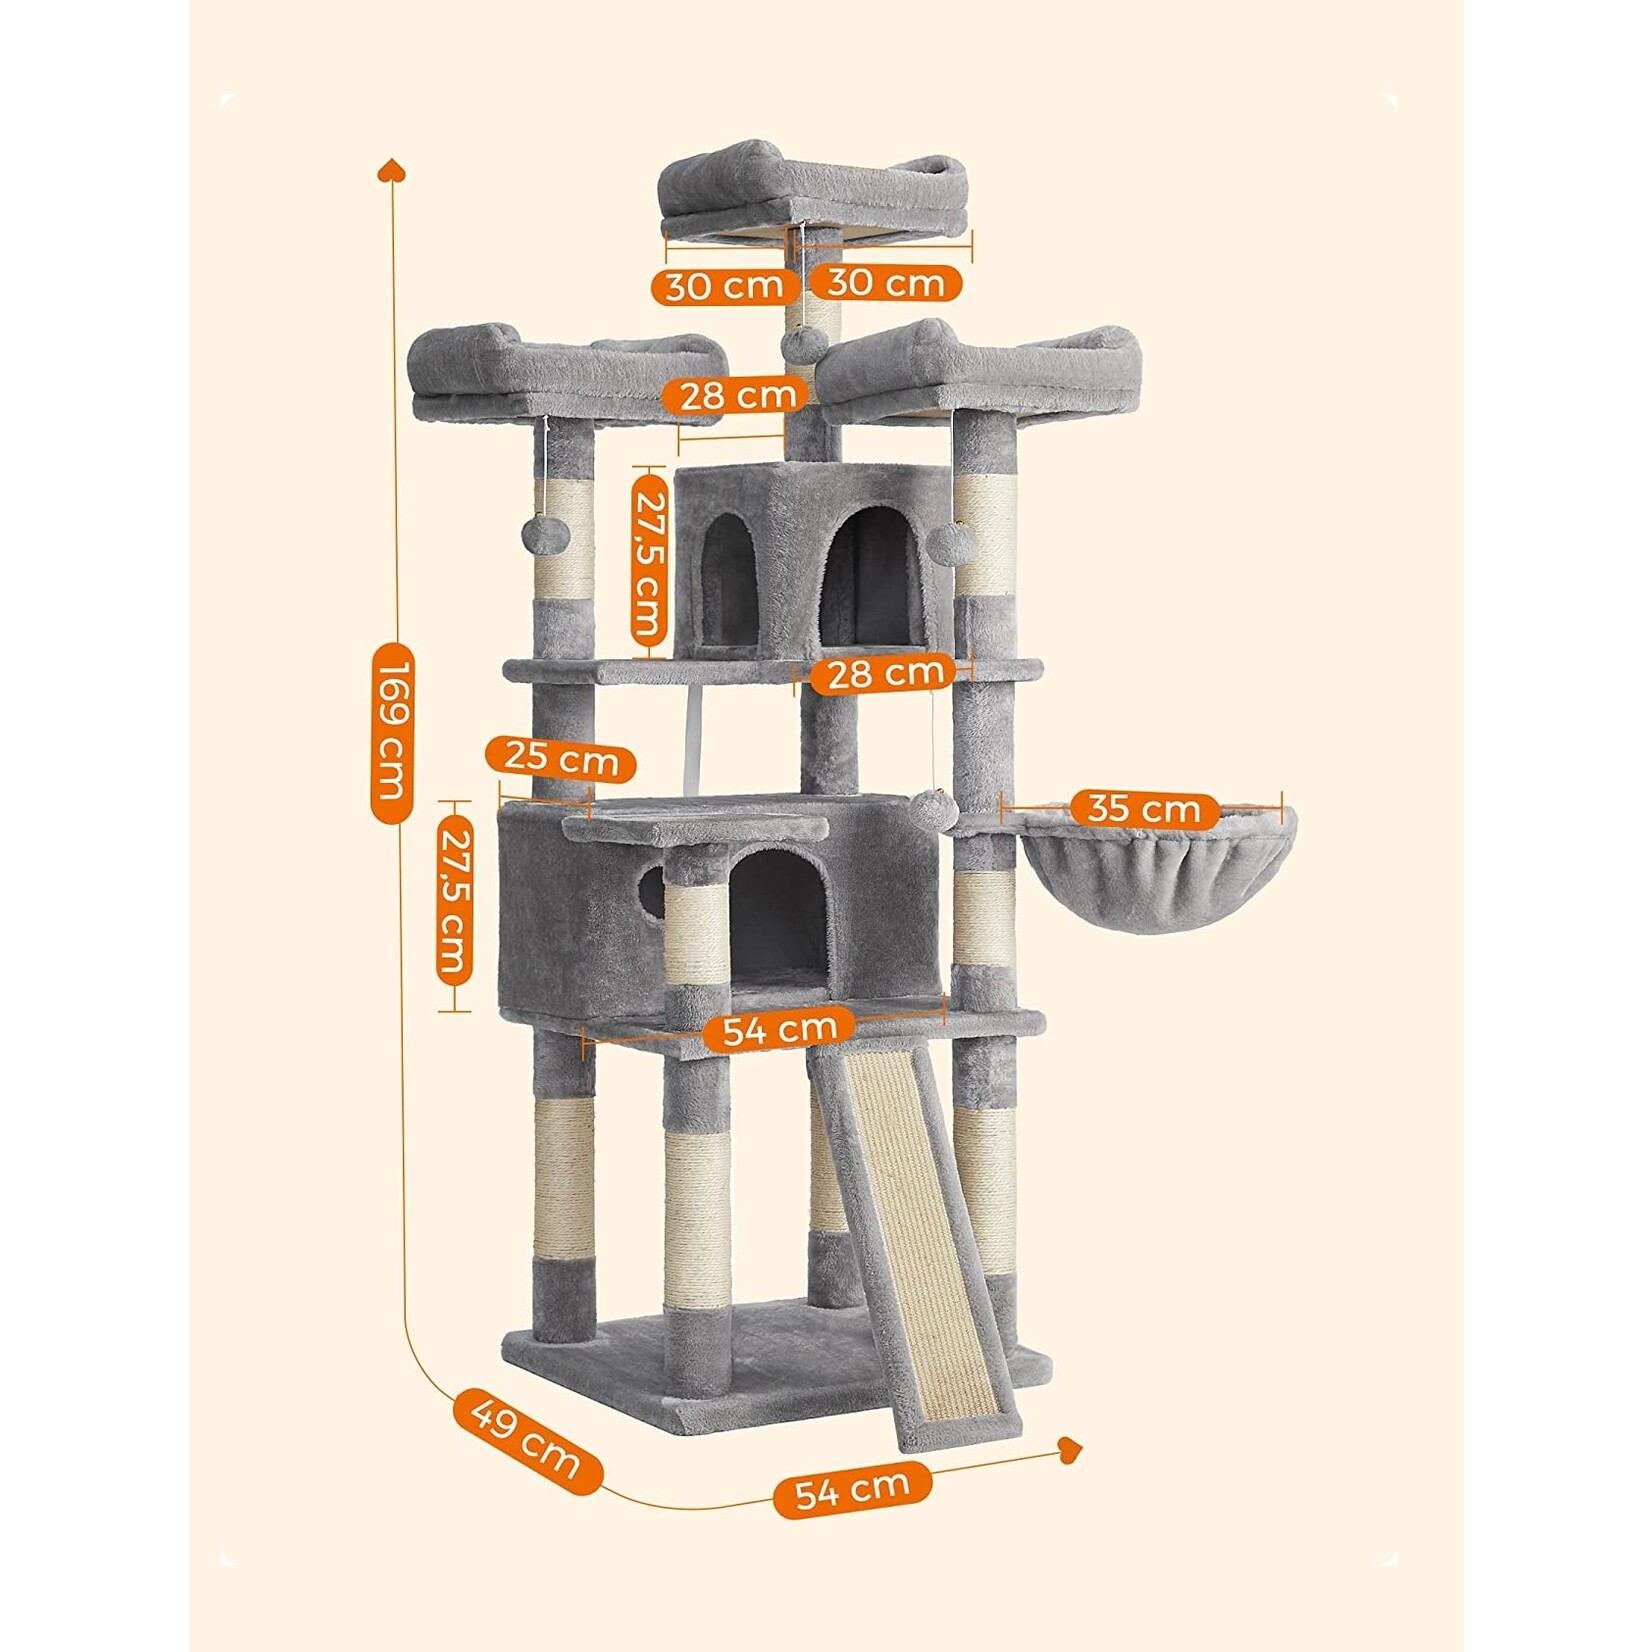 Bobbel Home Bobbel Home - Stable Scratching Post - Incl. 3 Viewing Platforms - 2 Caves - Basket - Scratching Board - Grey